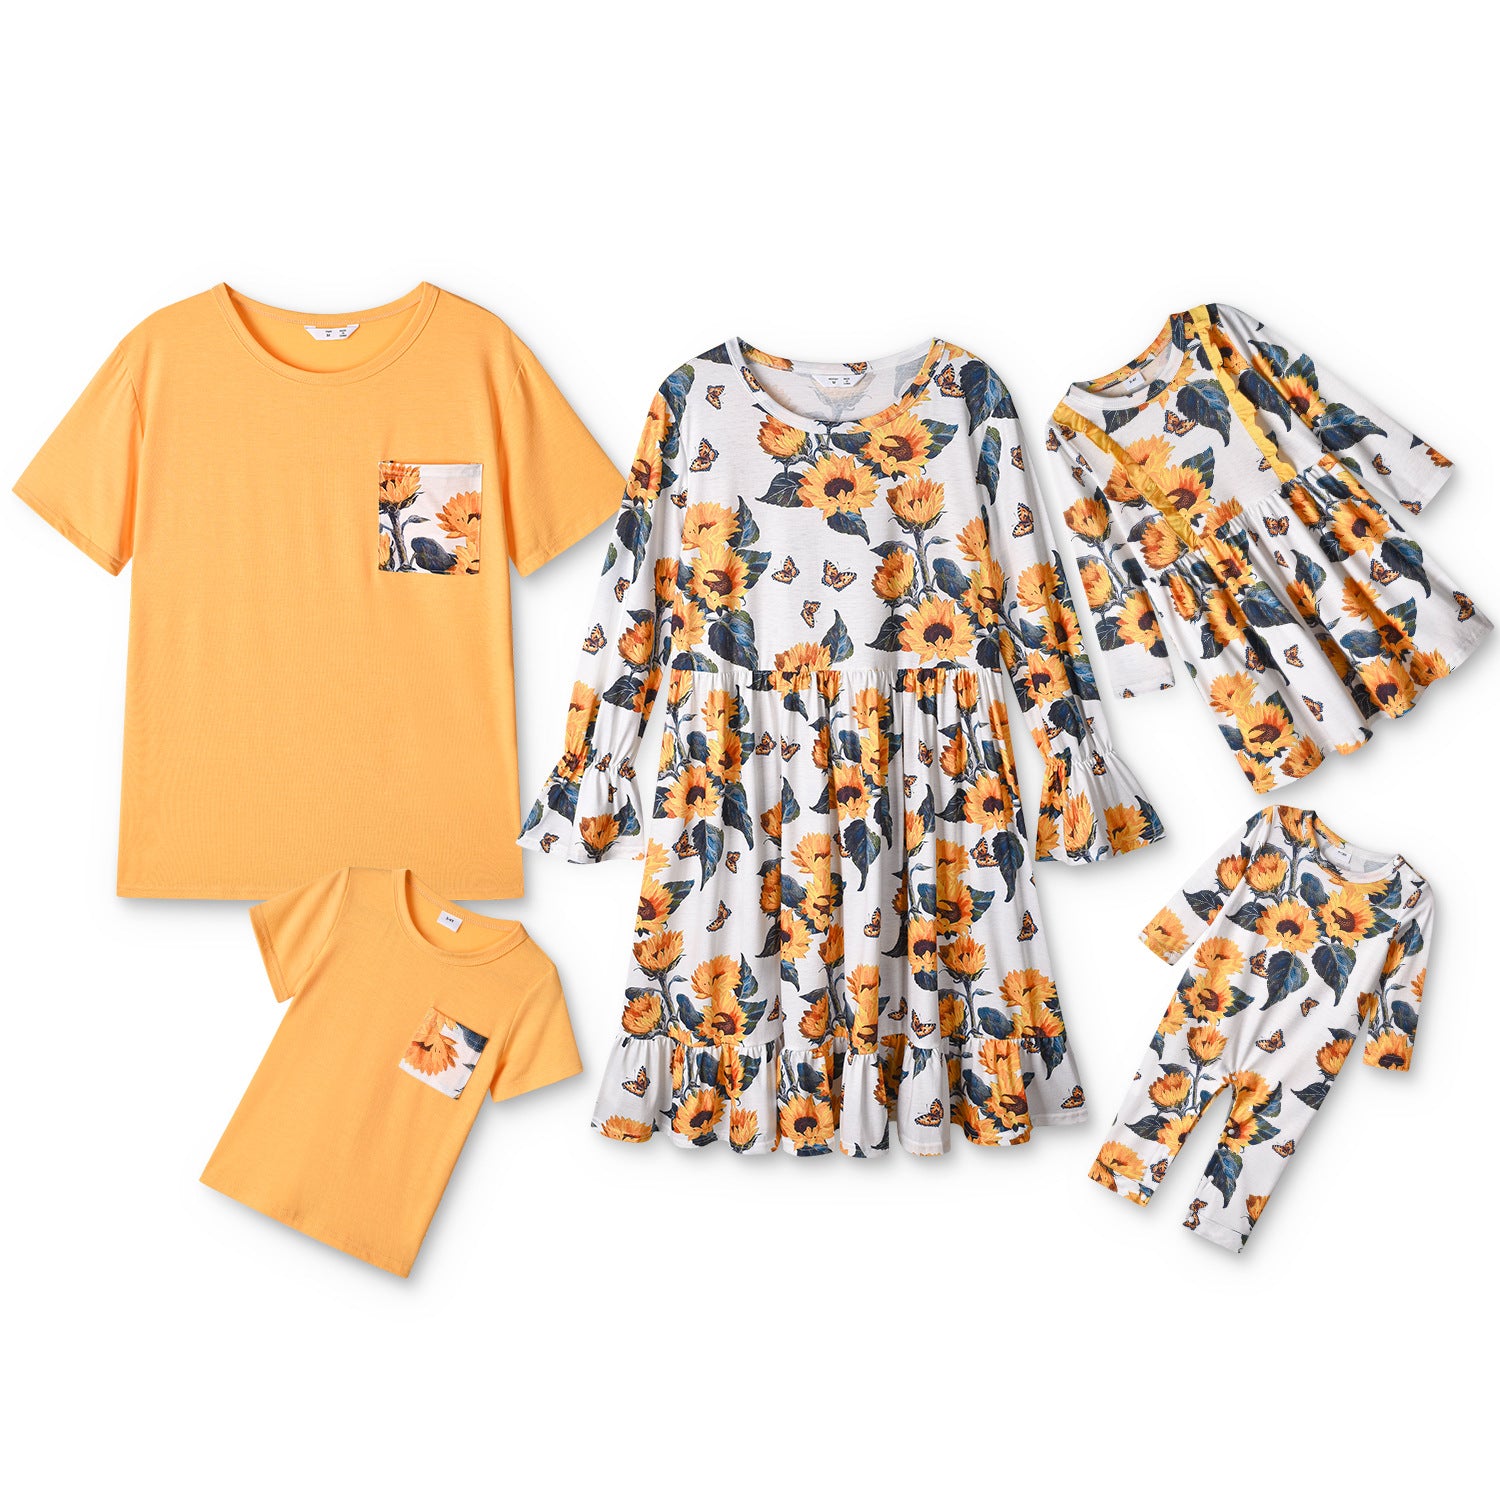 Family Matching Sets Mother Daughter Father Son Dresses Tops